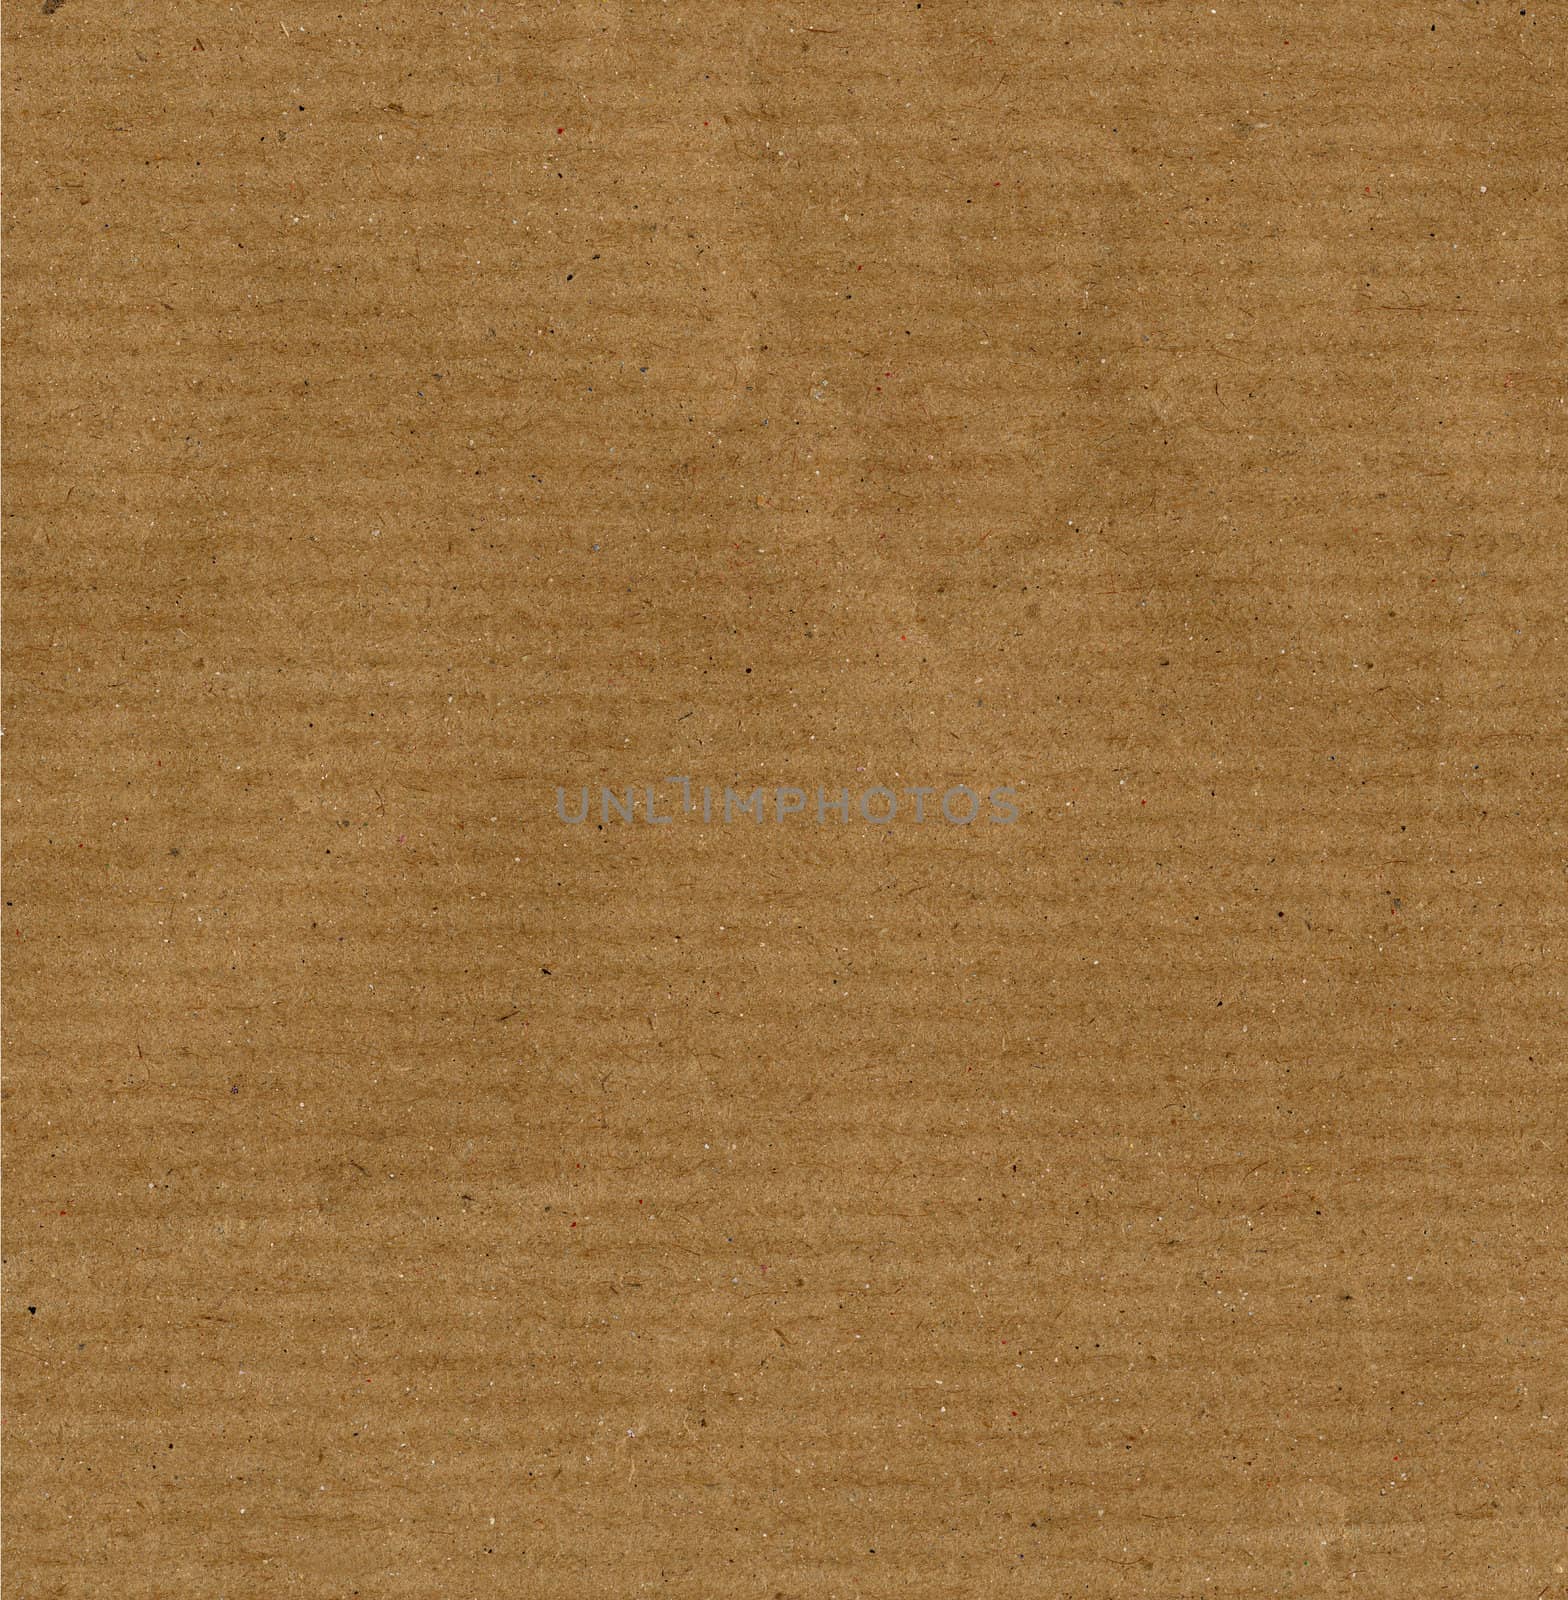 Brown paper background by paolo77